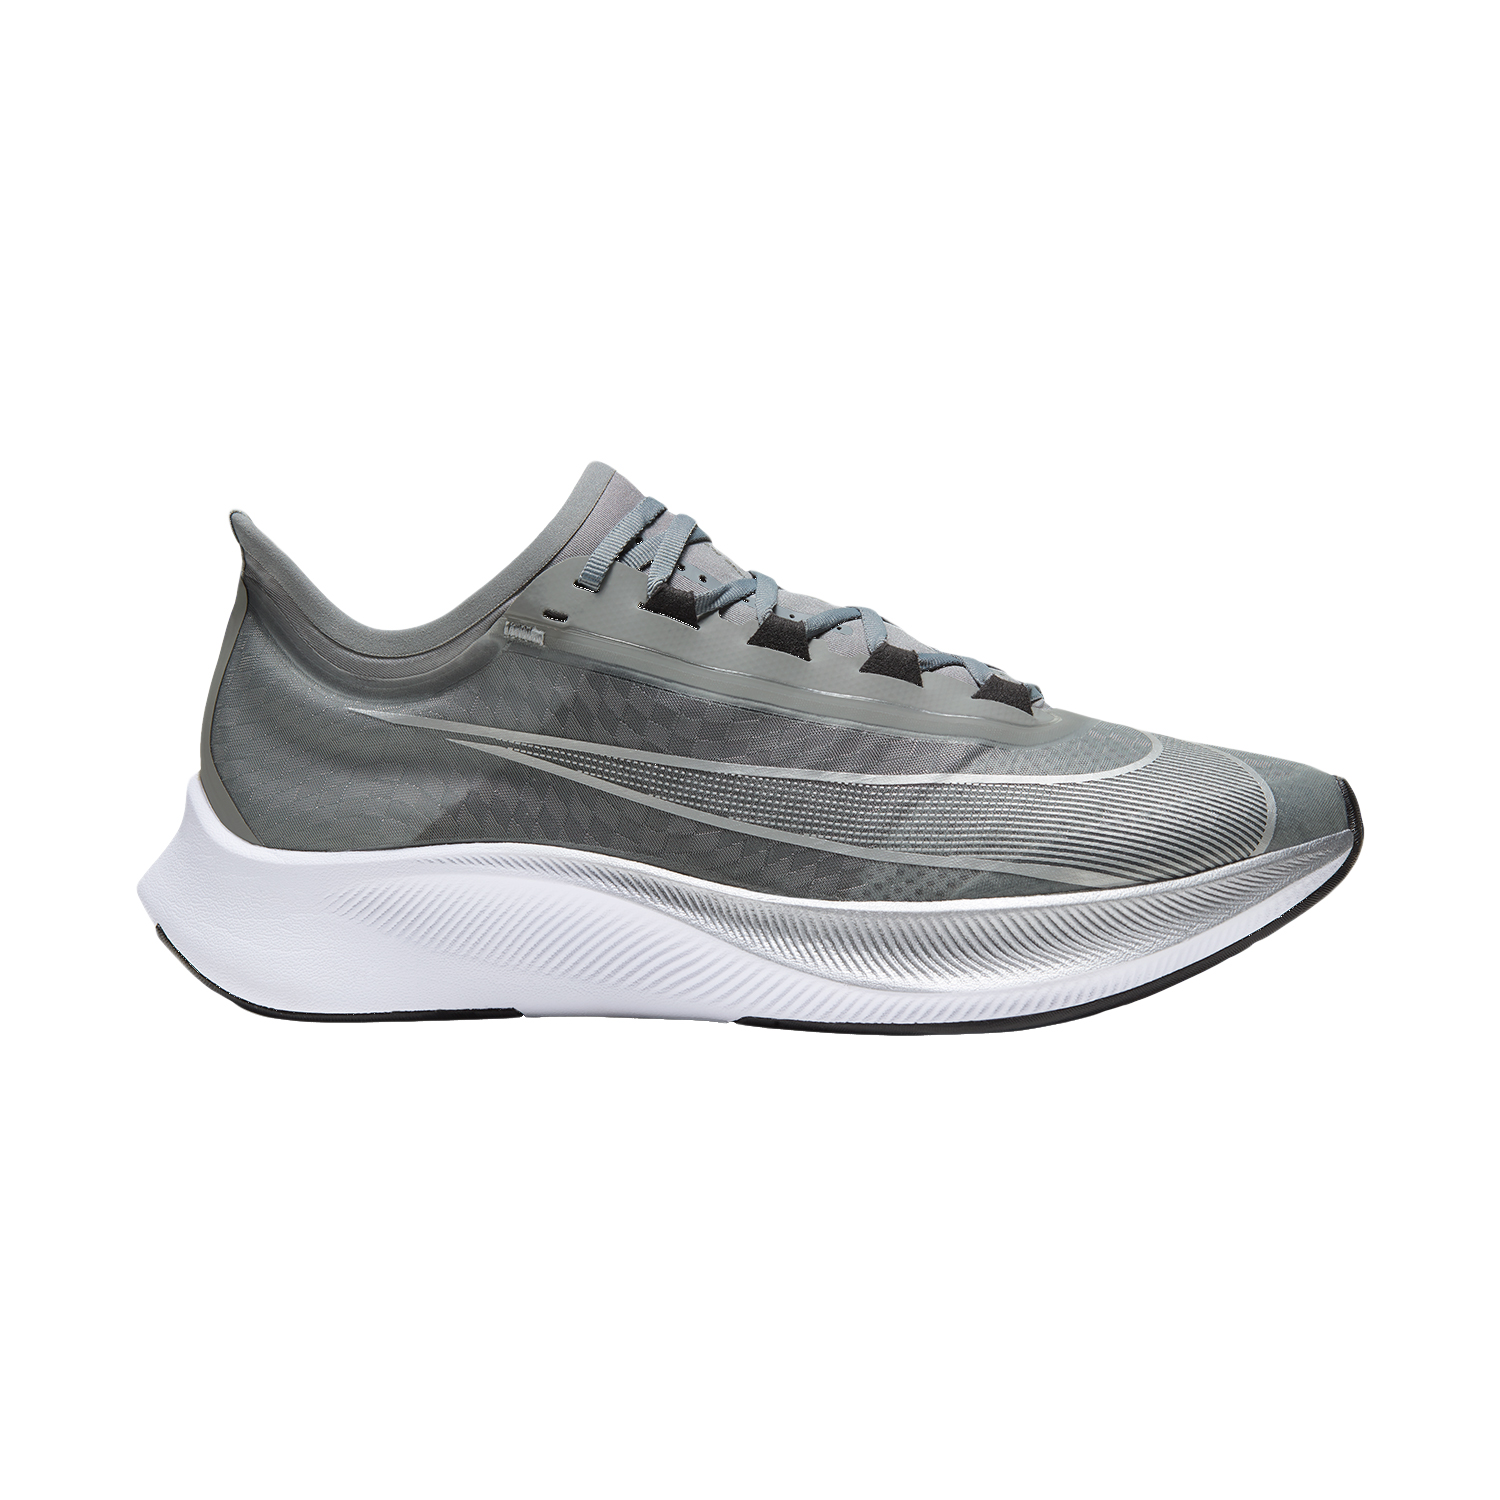 Nike Zoom Fly 3 Men's Running Shoes - Particle Grey/Silver